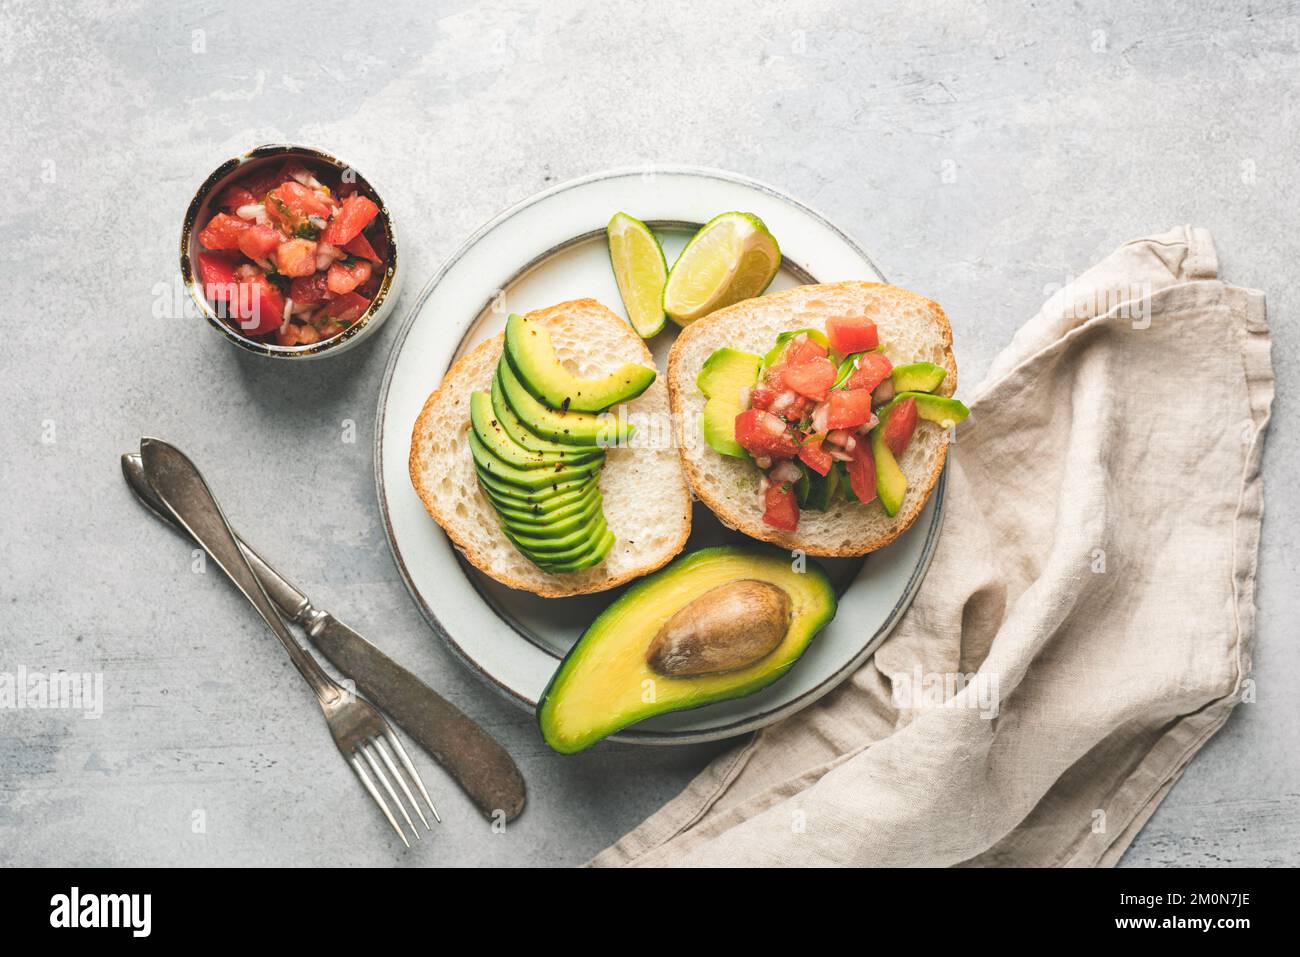 Breakfast avocado toast on english muffin with tomato salsa. Top view. Healthy food Stock Photo